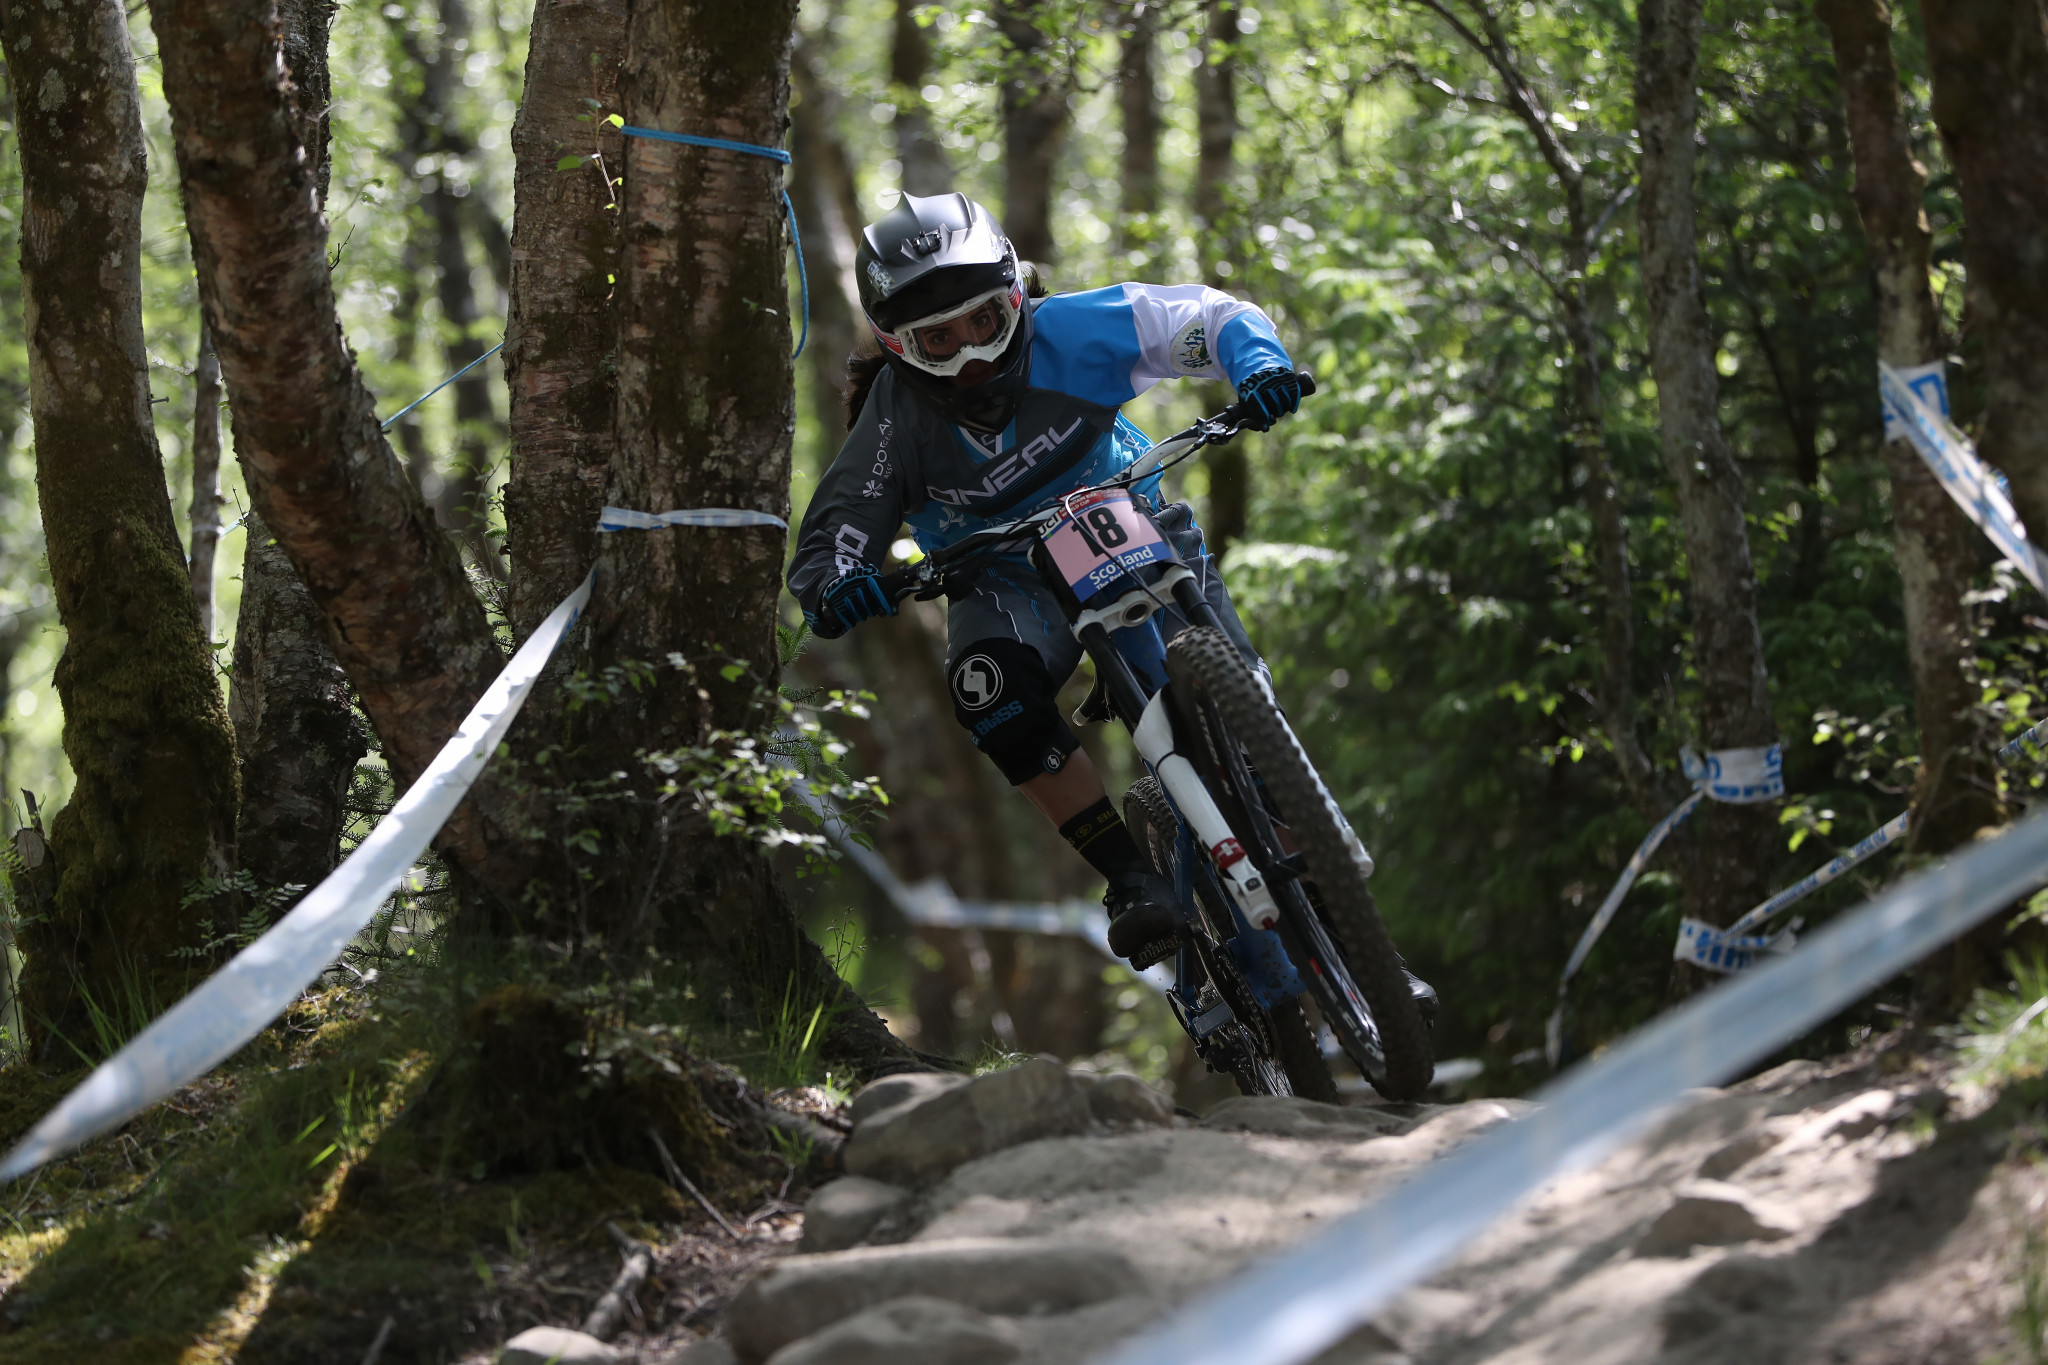 Fort William to welcome back UCI Downhill Mountain Bike World Cup for first time since 2019